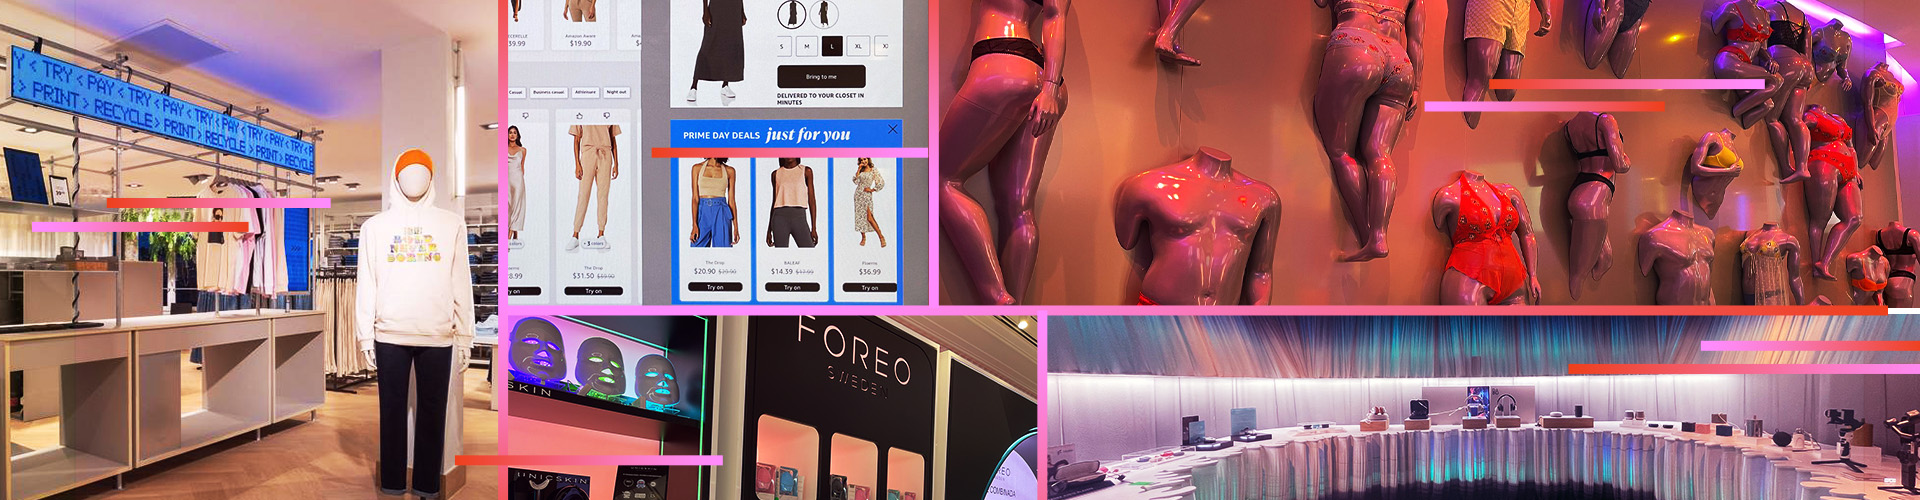 Retail Reimagined, inclusive displays, customizable clothes, curated products banner